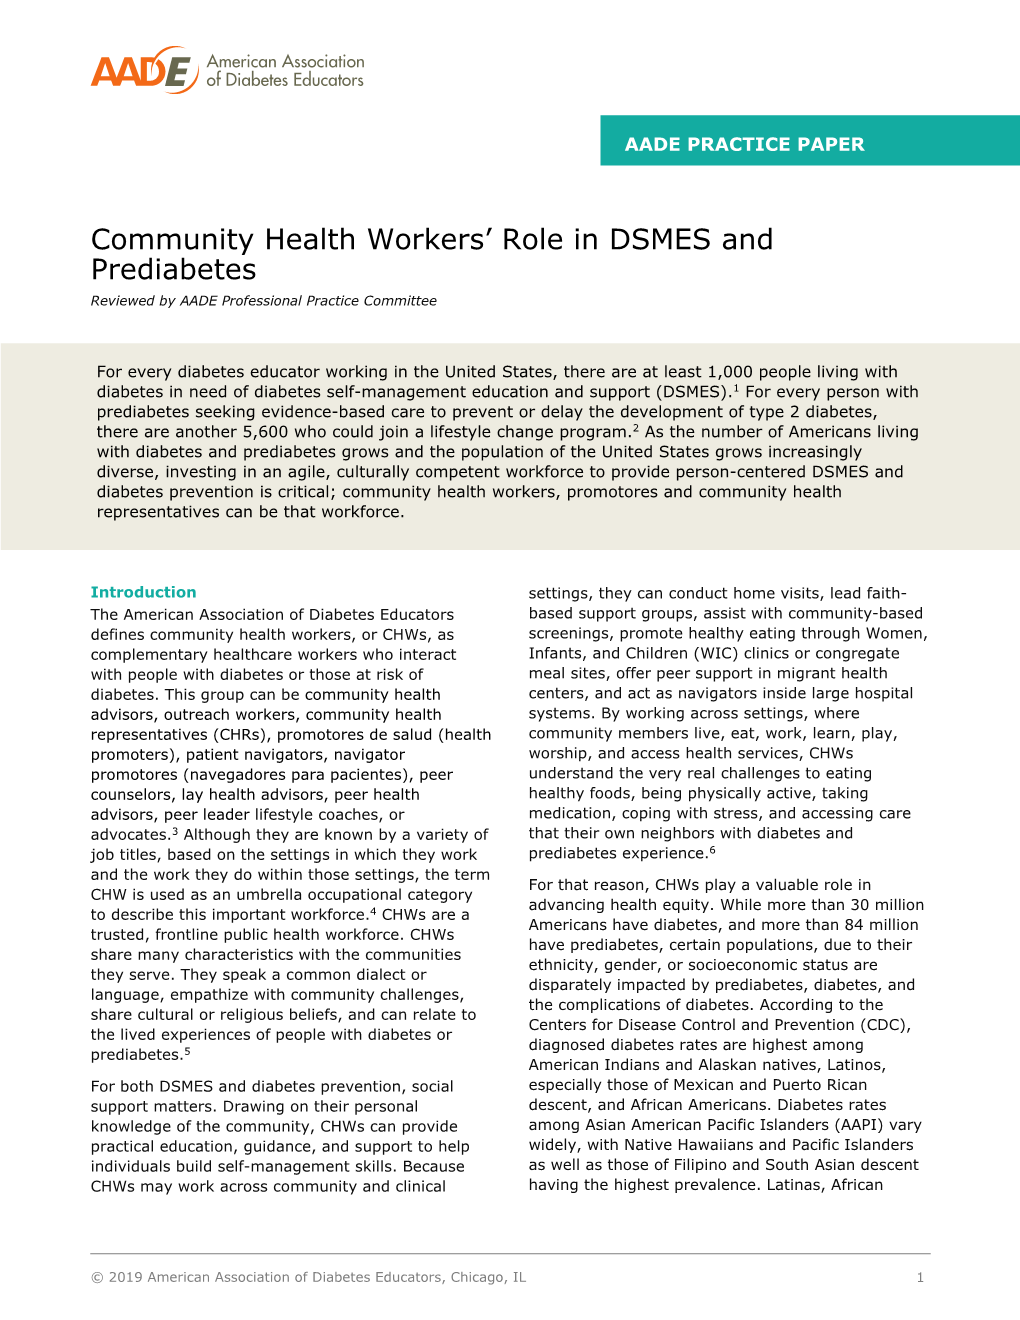 Community Health Workers' Role in DSMES and Prediabetes